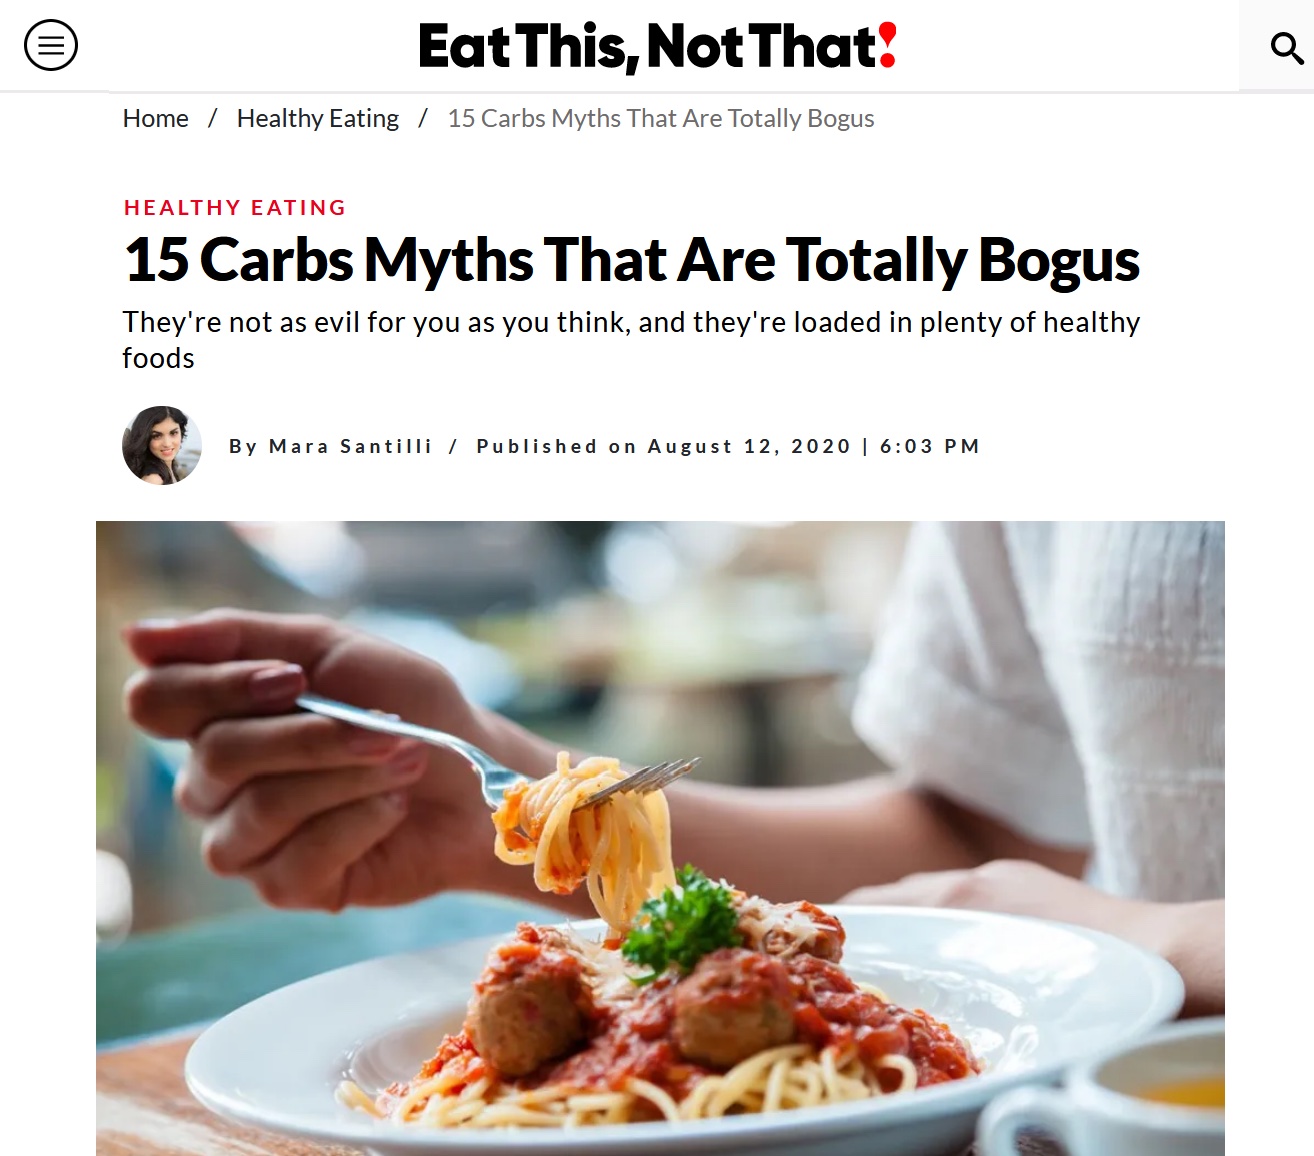 An article titles "15 Carbs Myths That Are Totally Bogus"